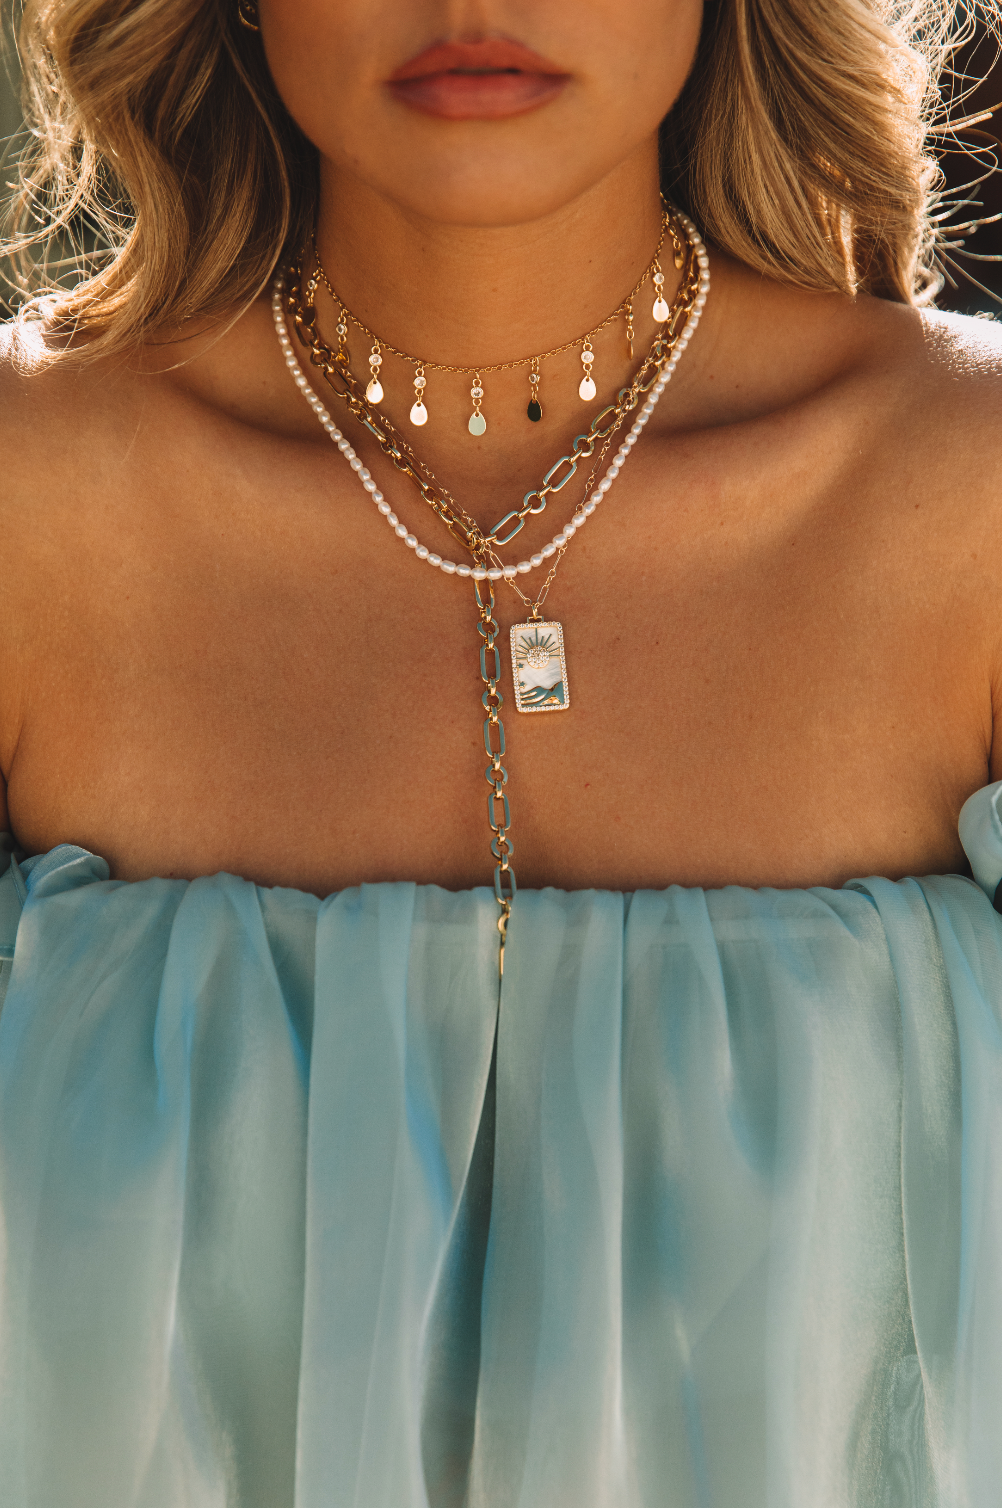 The BB Pearl Necklace